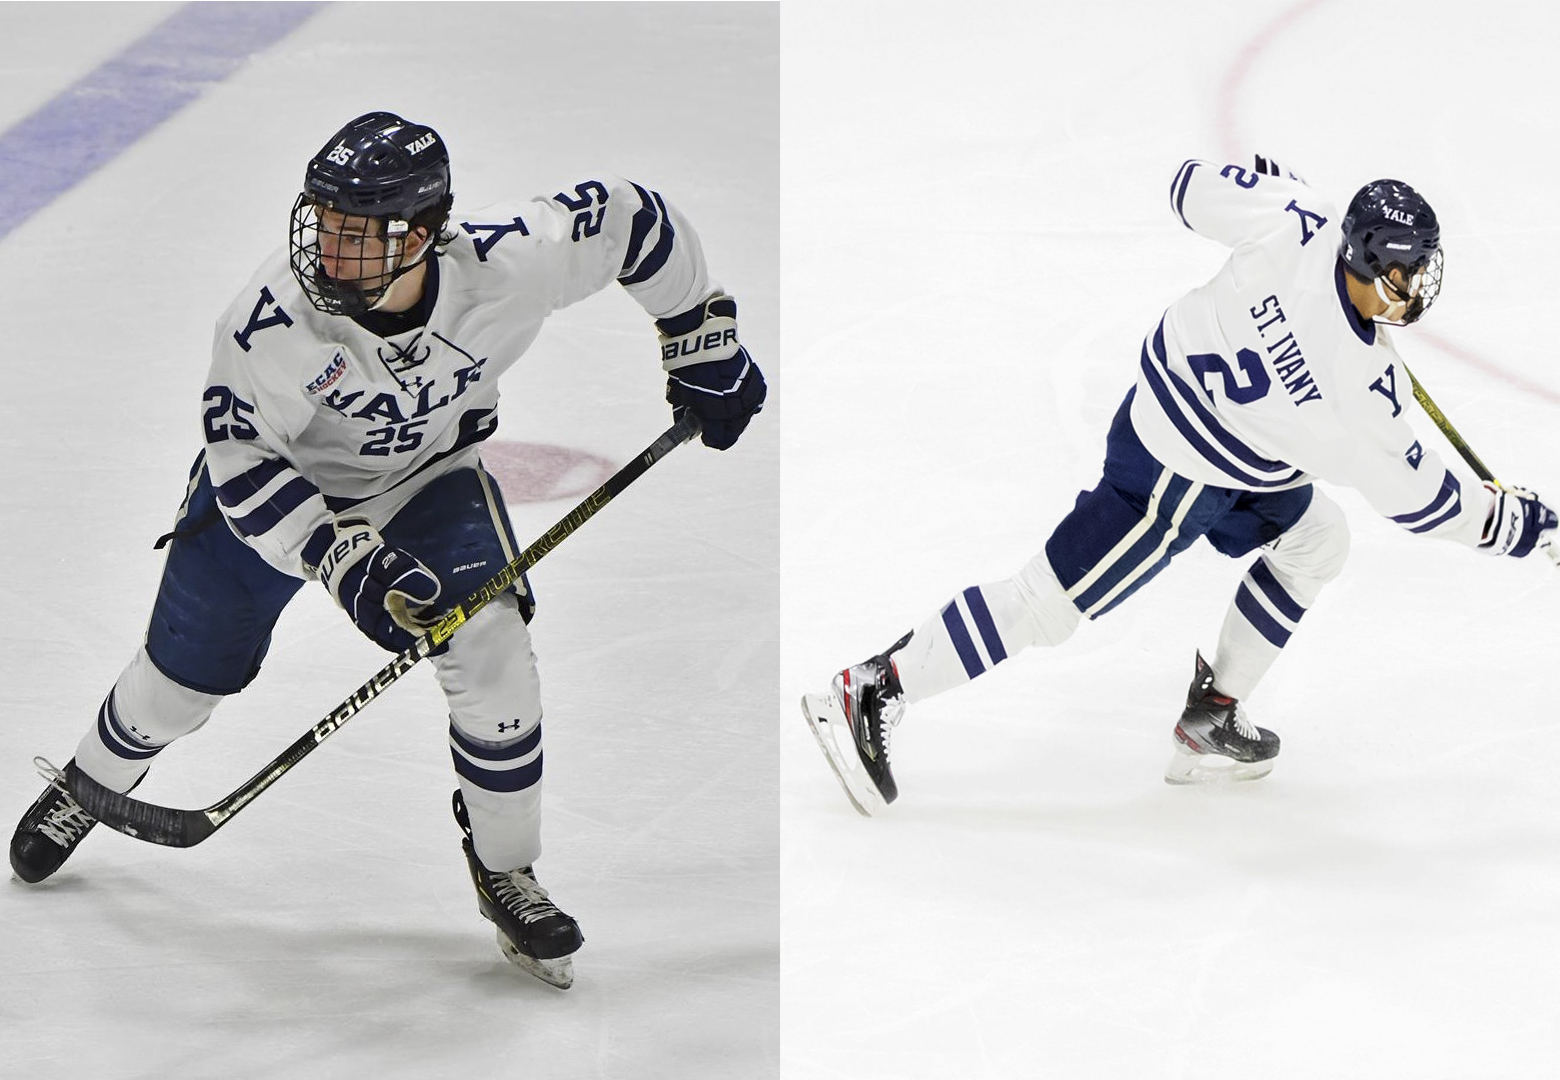 MENS HOCKEY Two Bulldogs set their sights outside Yale photo